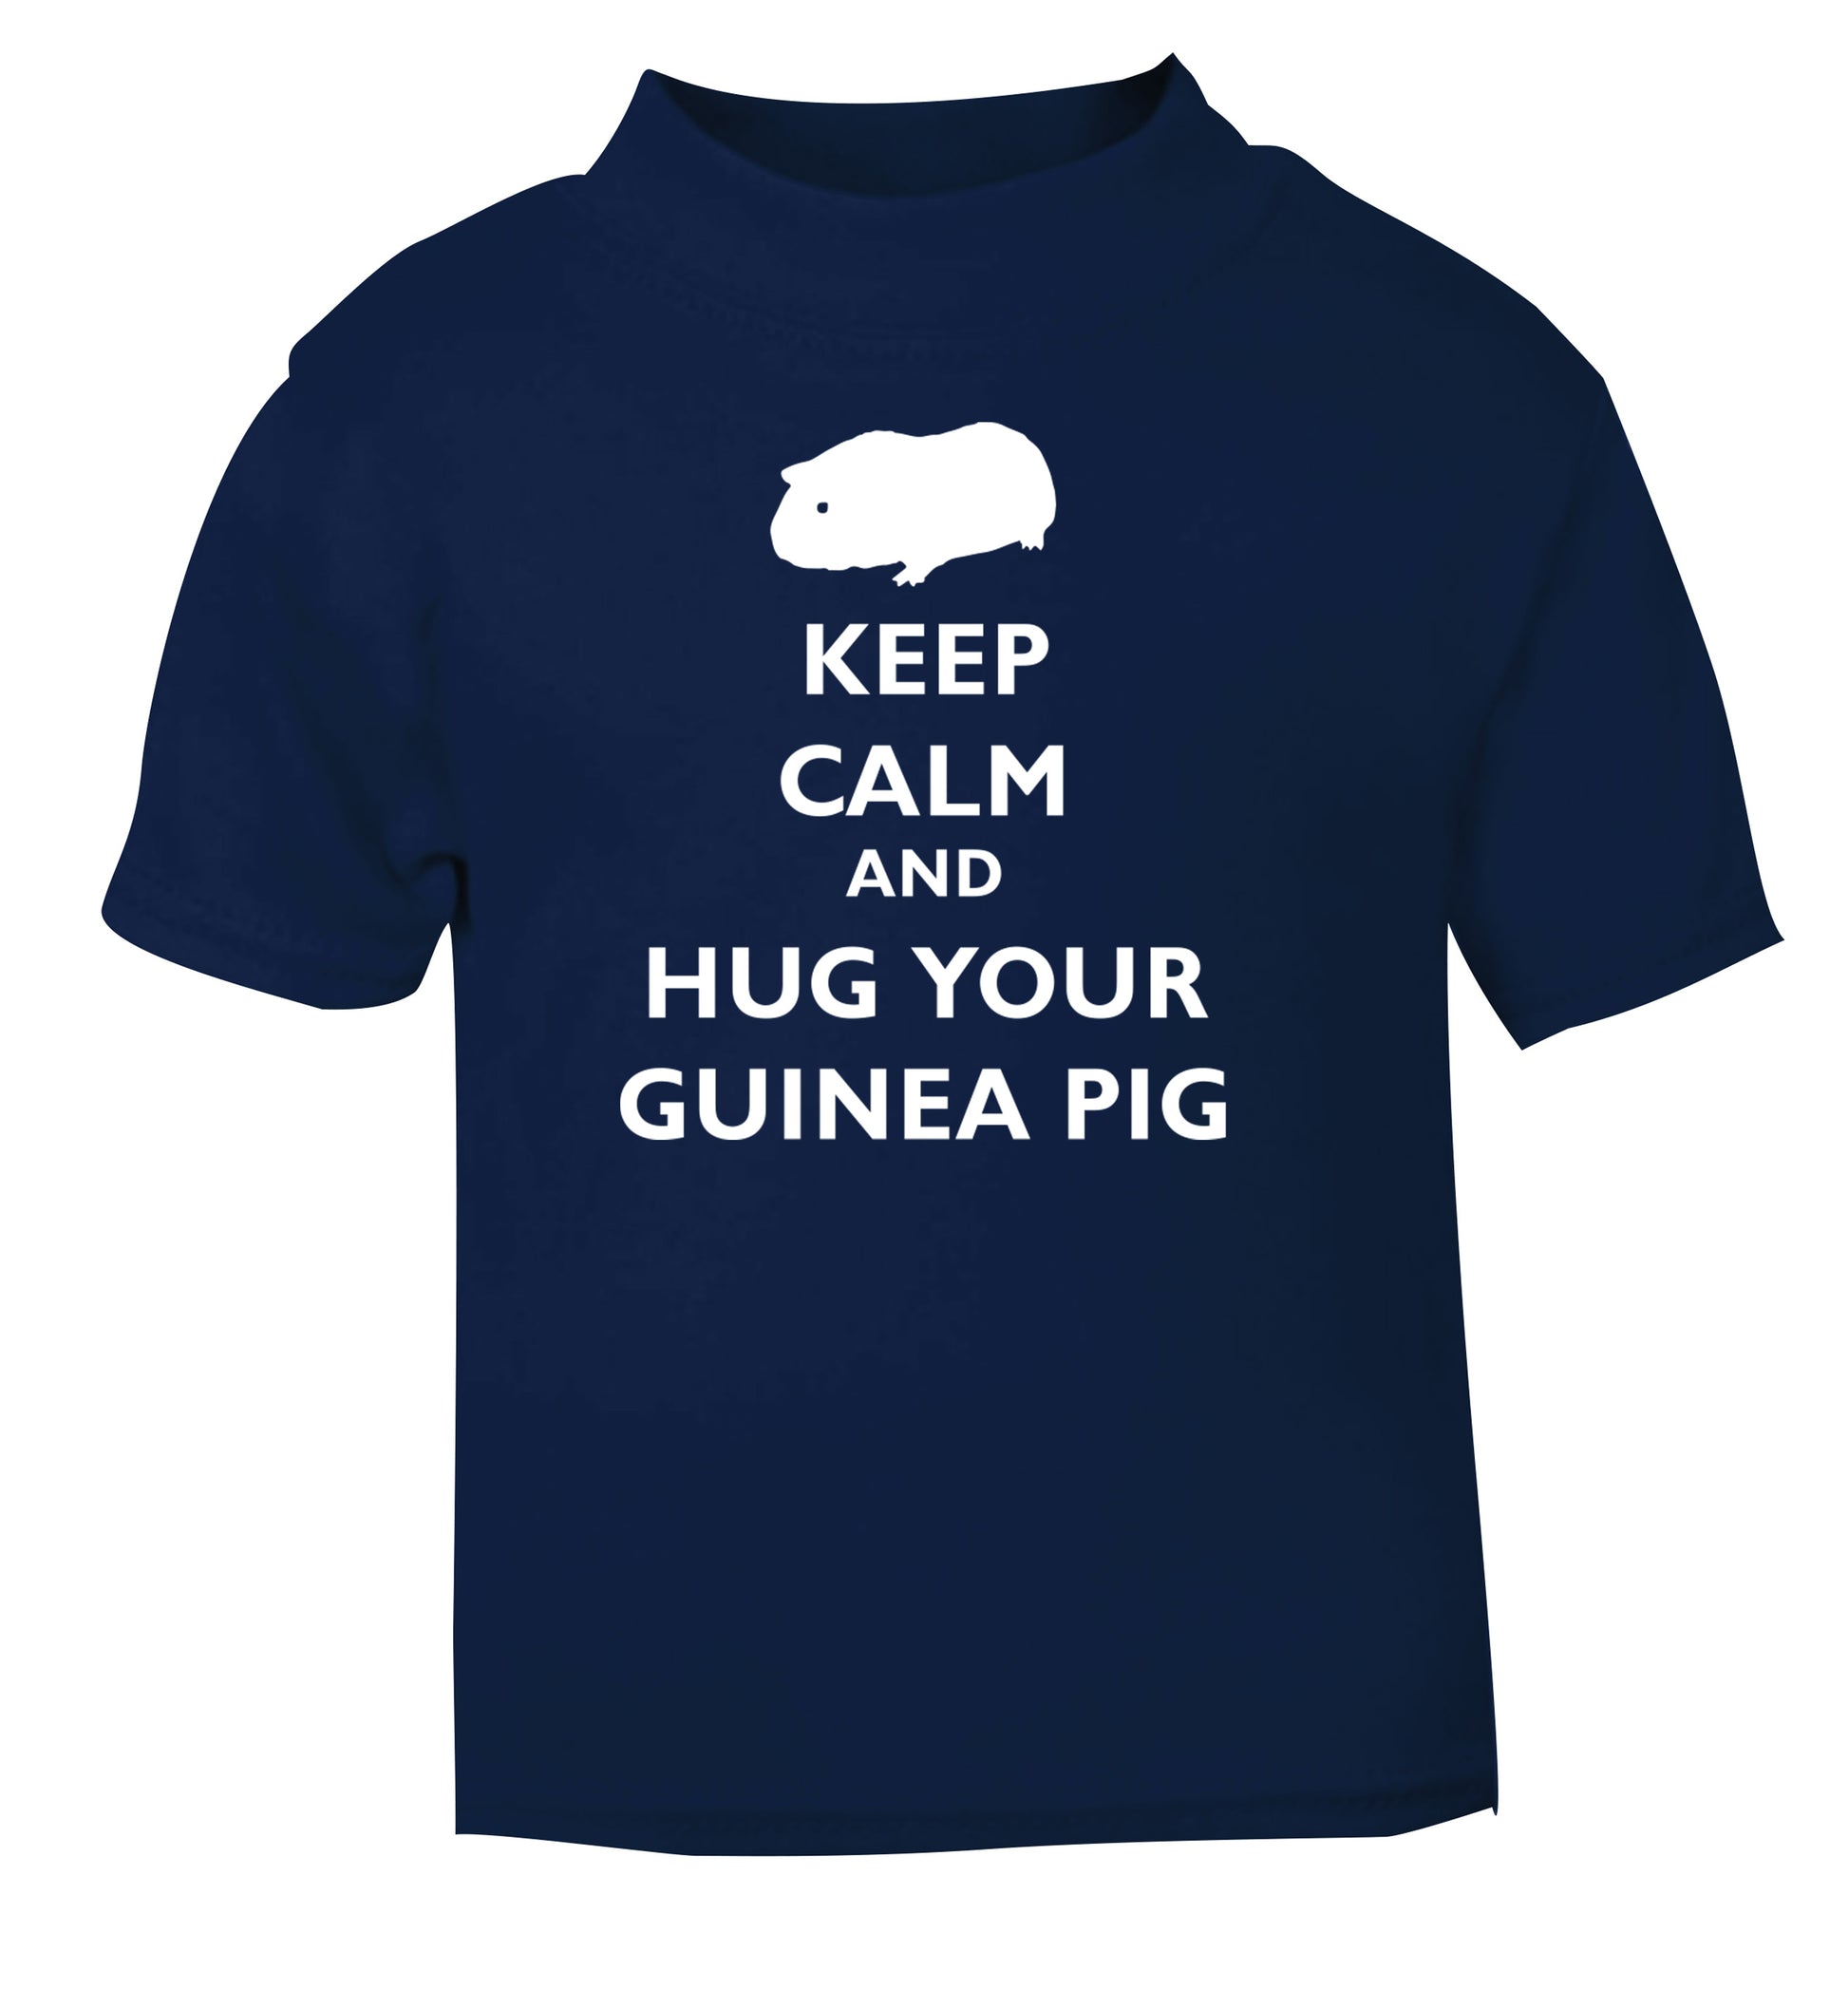 Keep calm and hug your guineapig navy Baby Toddler Tshirt 2 Years